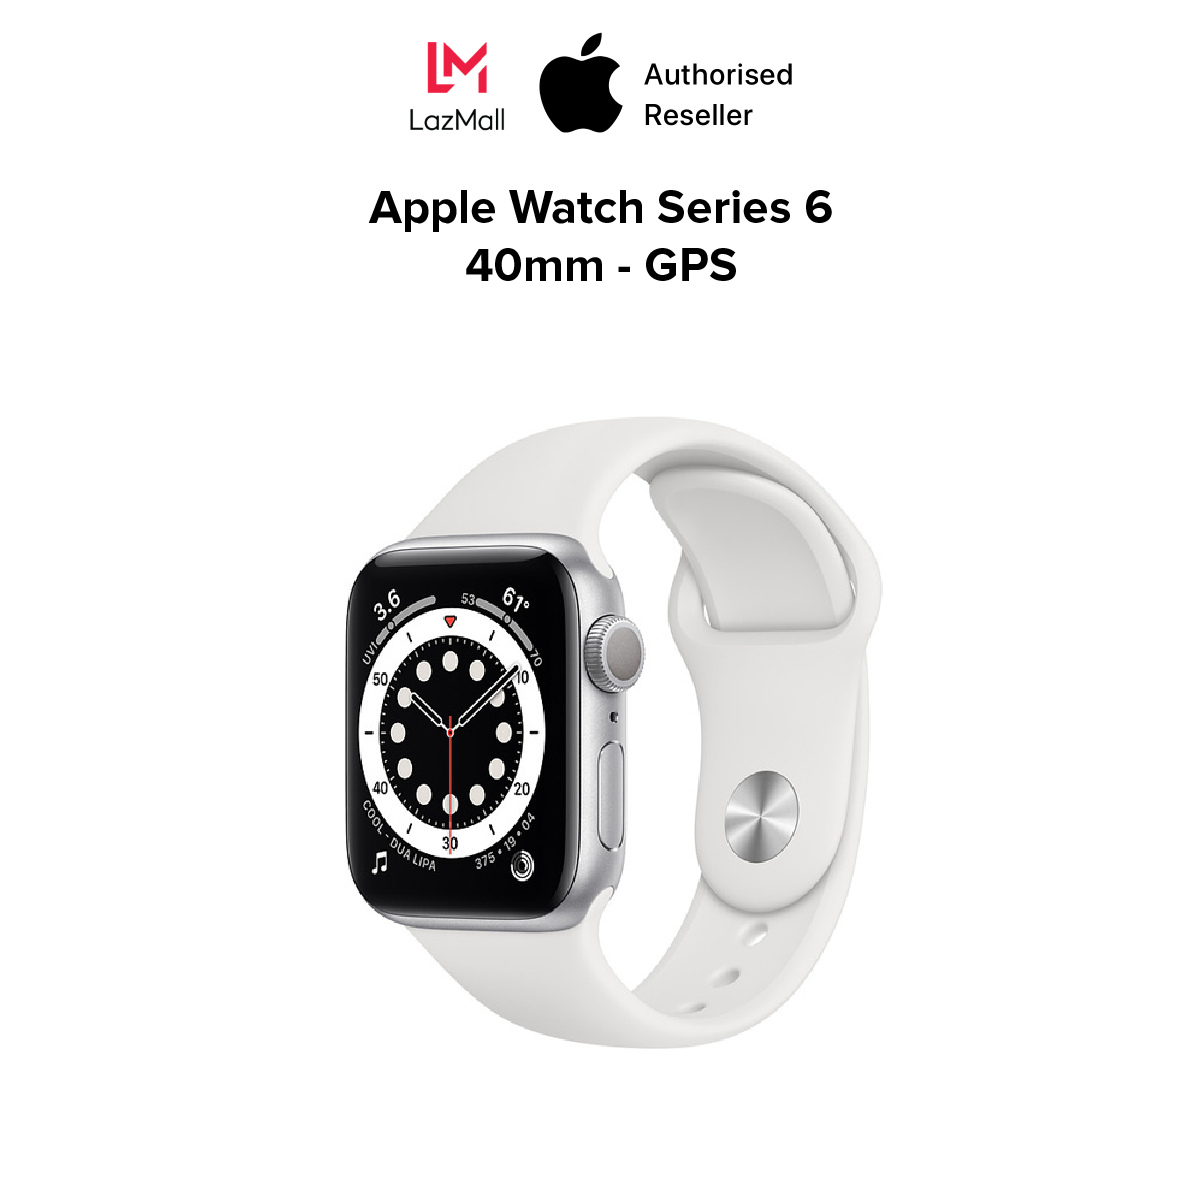 [MEGA SALE 11.11] Apple Watch Series 6 40mm GPS - Genuine VN/A - 100% New (Not Activated, Not Used) - 12 Months Warranty At Apple Service - 0% Installment Payment via Credit card - MG143VN/A / MG123VN/A / M00A3VN/A / MG283VN/A / MG133VN/A